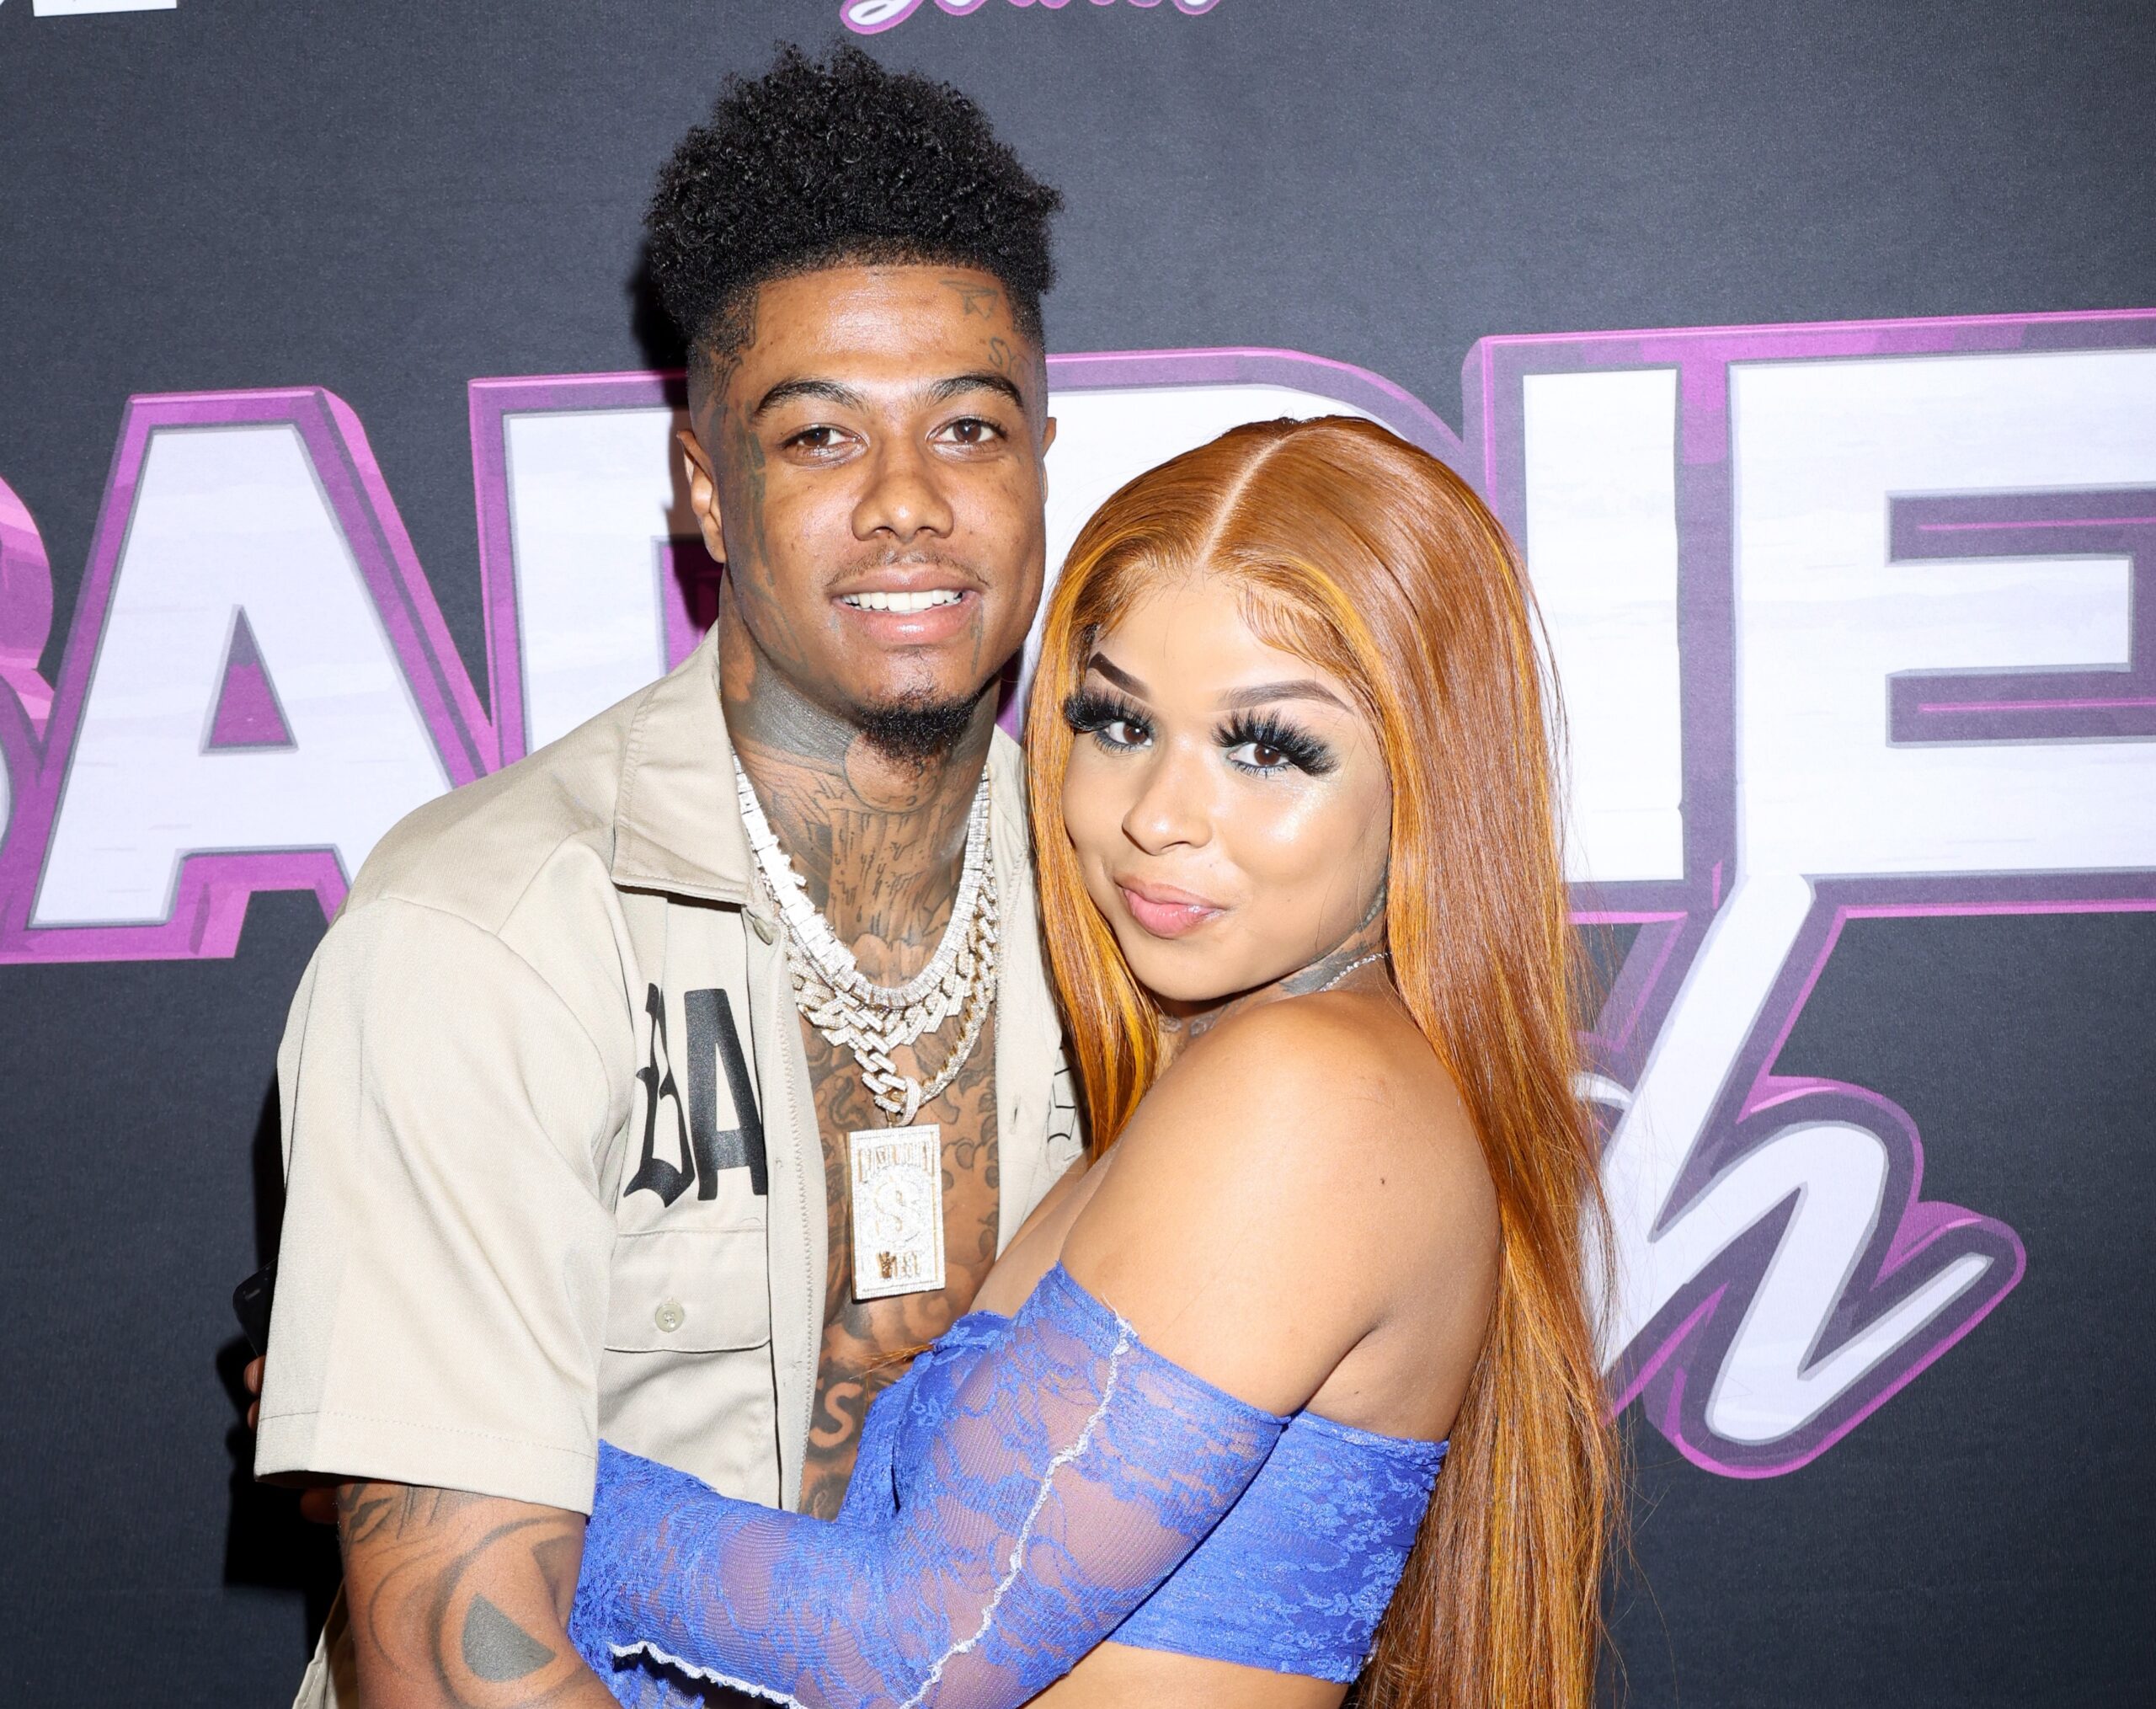 Blueface Addresses His Artist, Chrisean Rock, About Getting Another Tattoo  Of Him